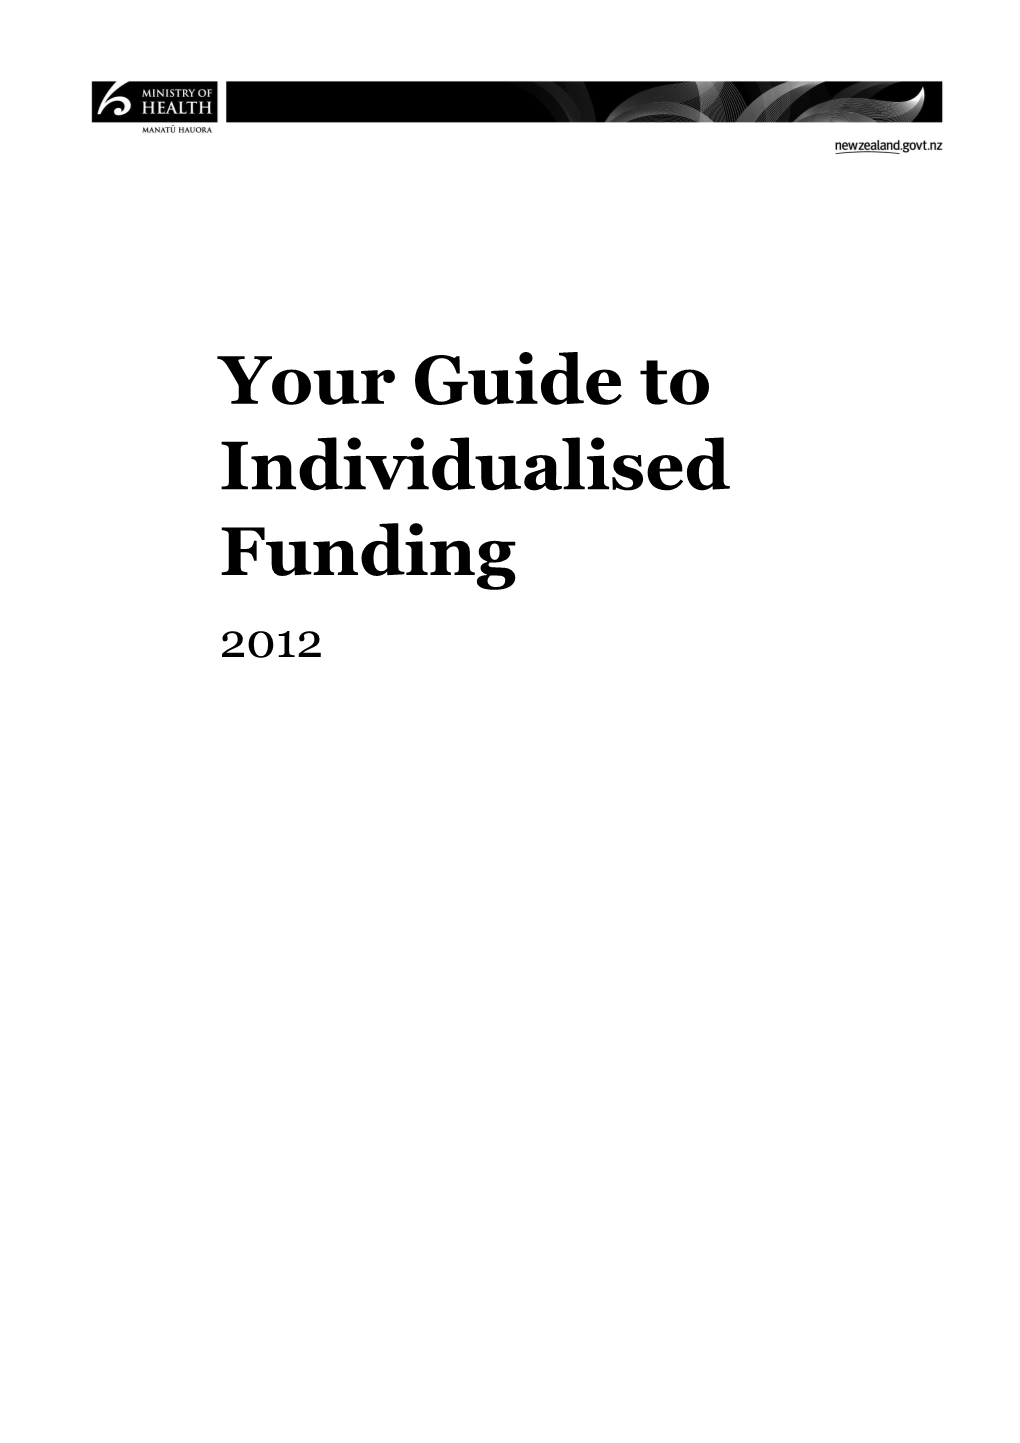 Your Guide to Individualised Funding